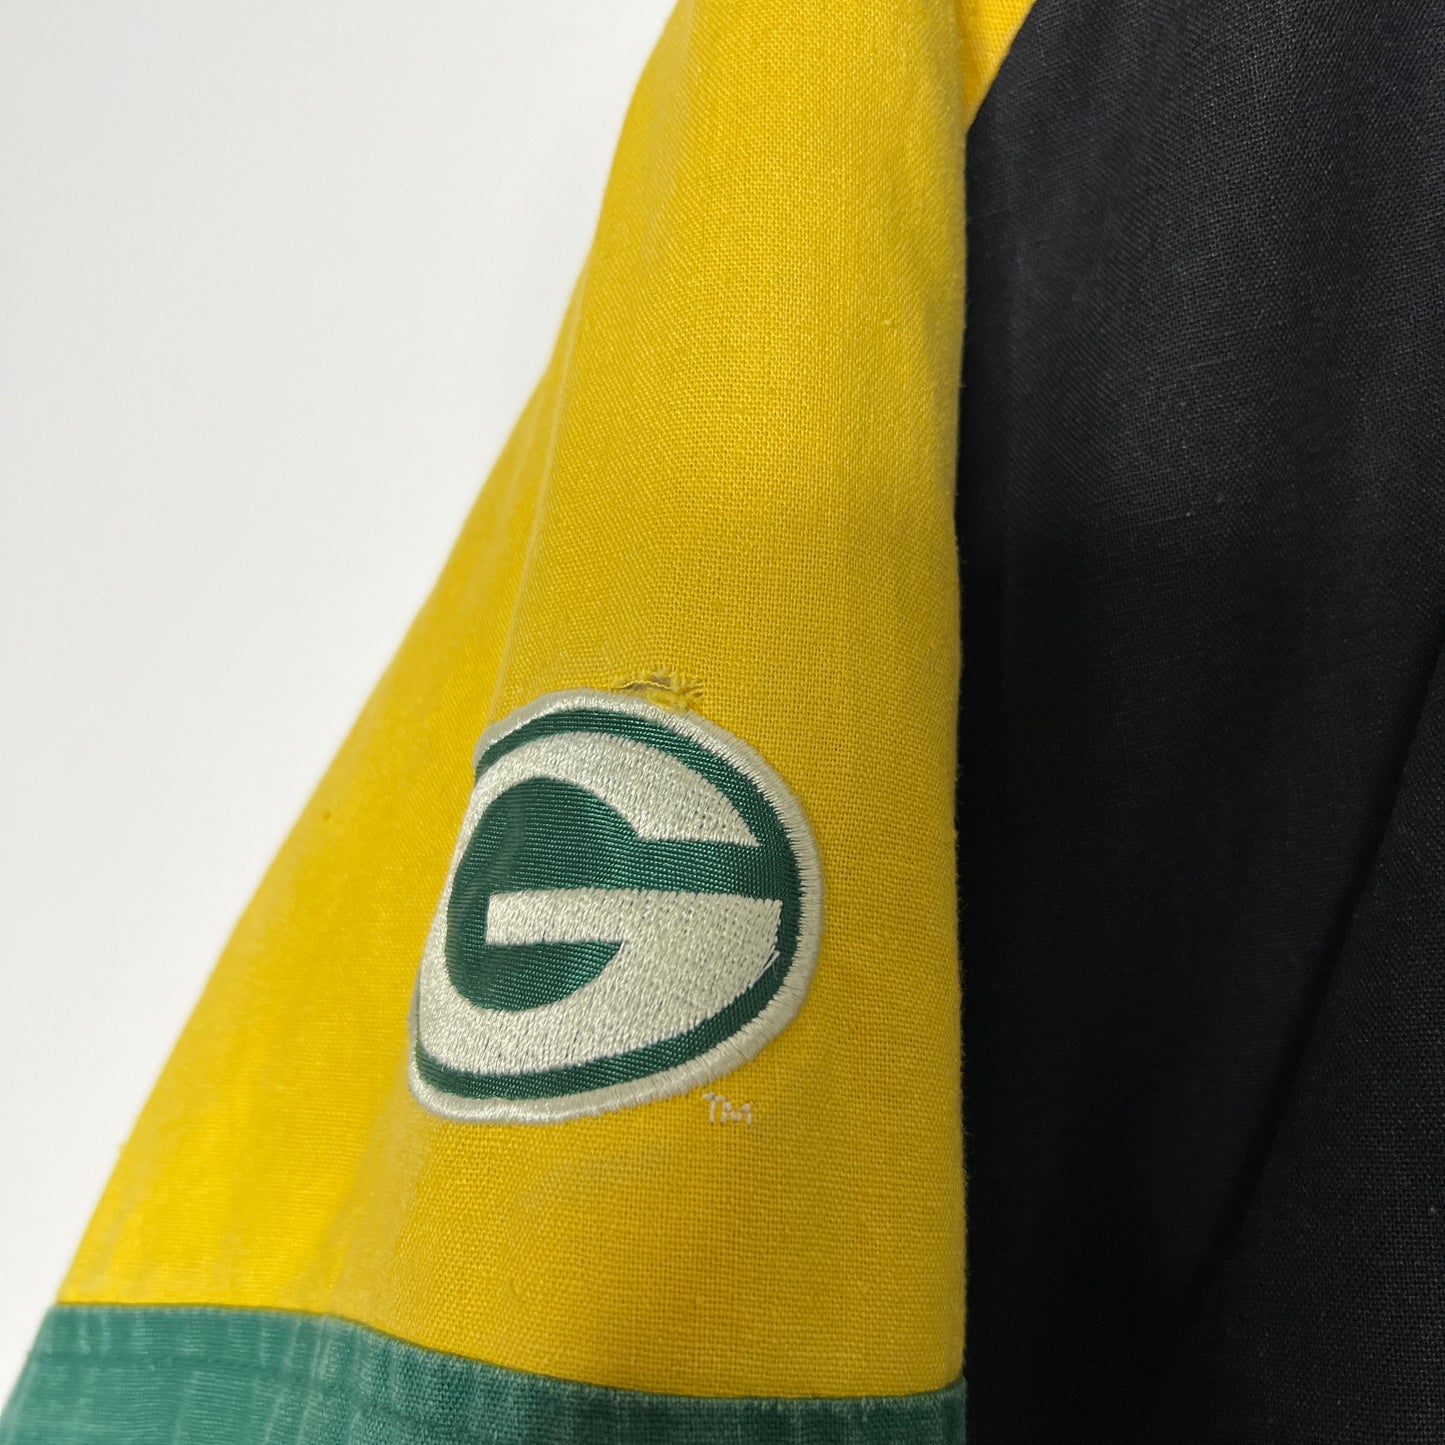 Packers Mirage Jacket